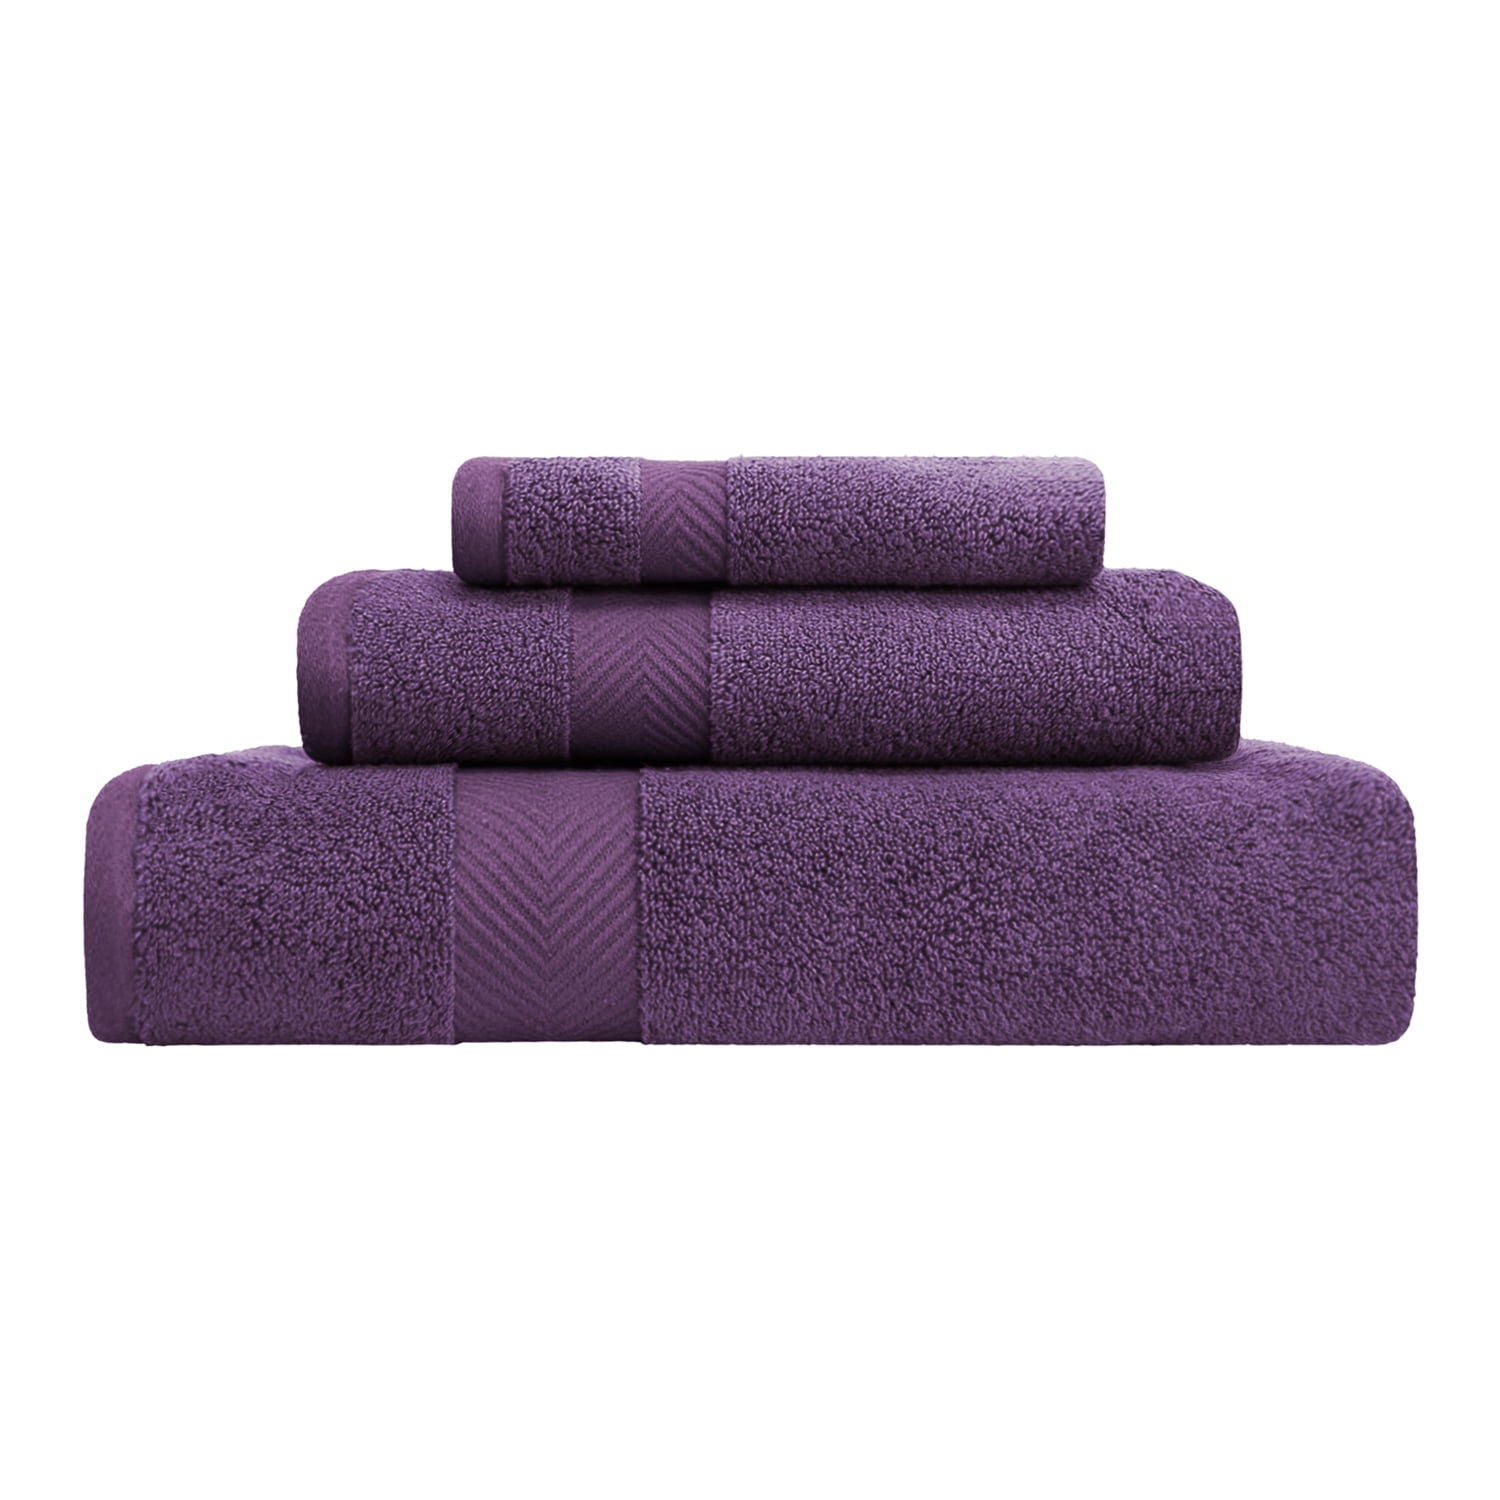 Superior Cotton Bath Towel Set, Zero Twist, Ribbed Geometric, Large Plush  Absorbent Body Towels, Luxury Soft Quick Drying, Shower, Spa, Hotel, Pool